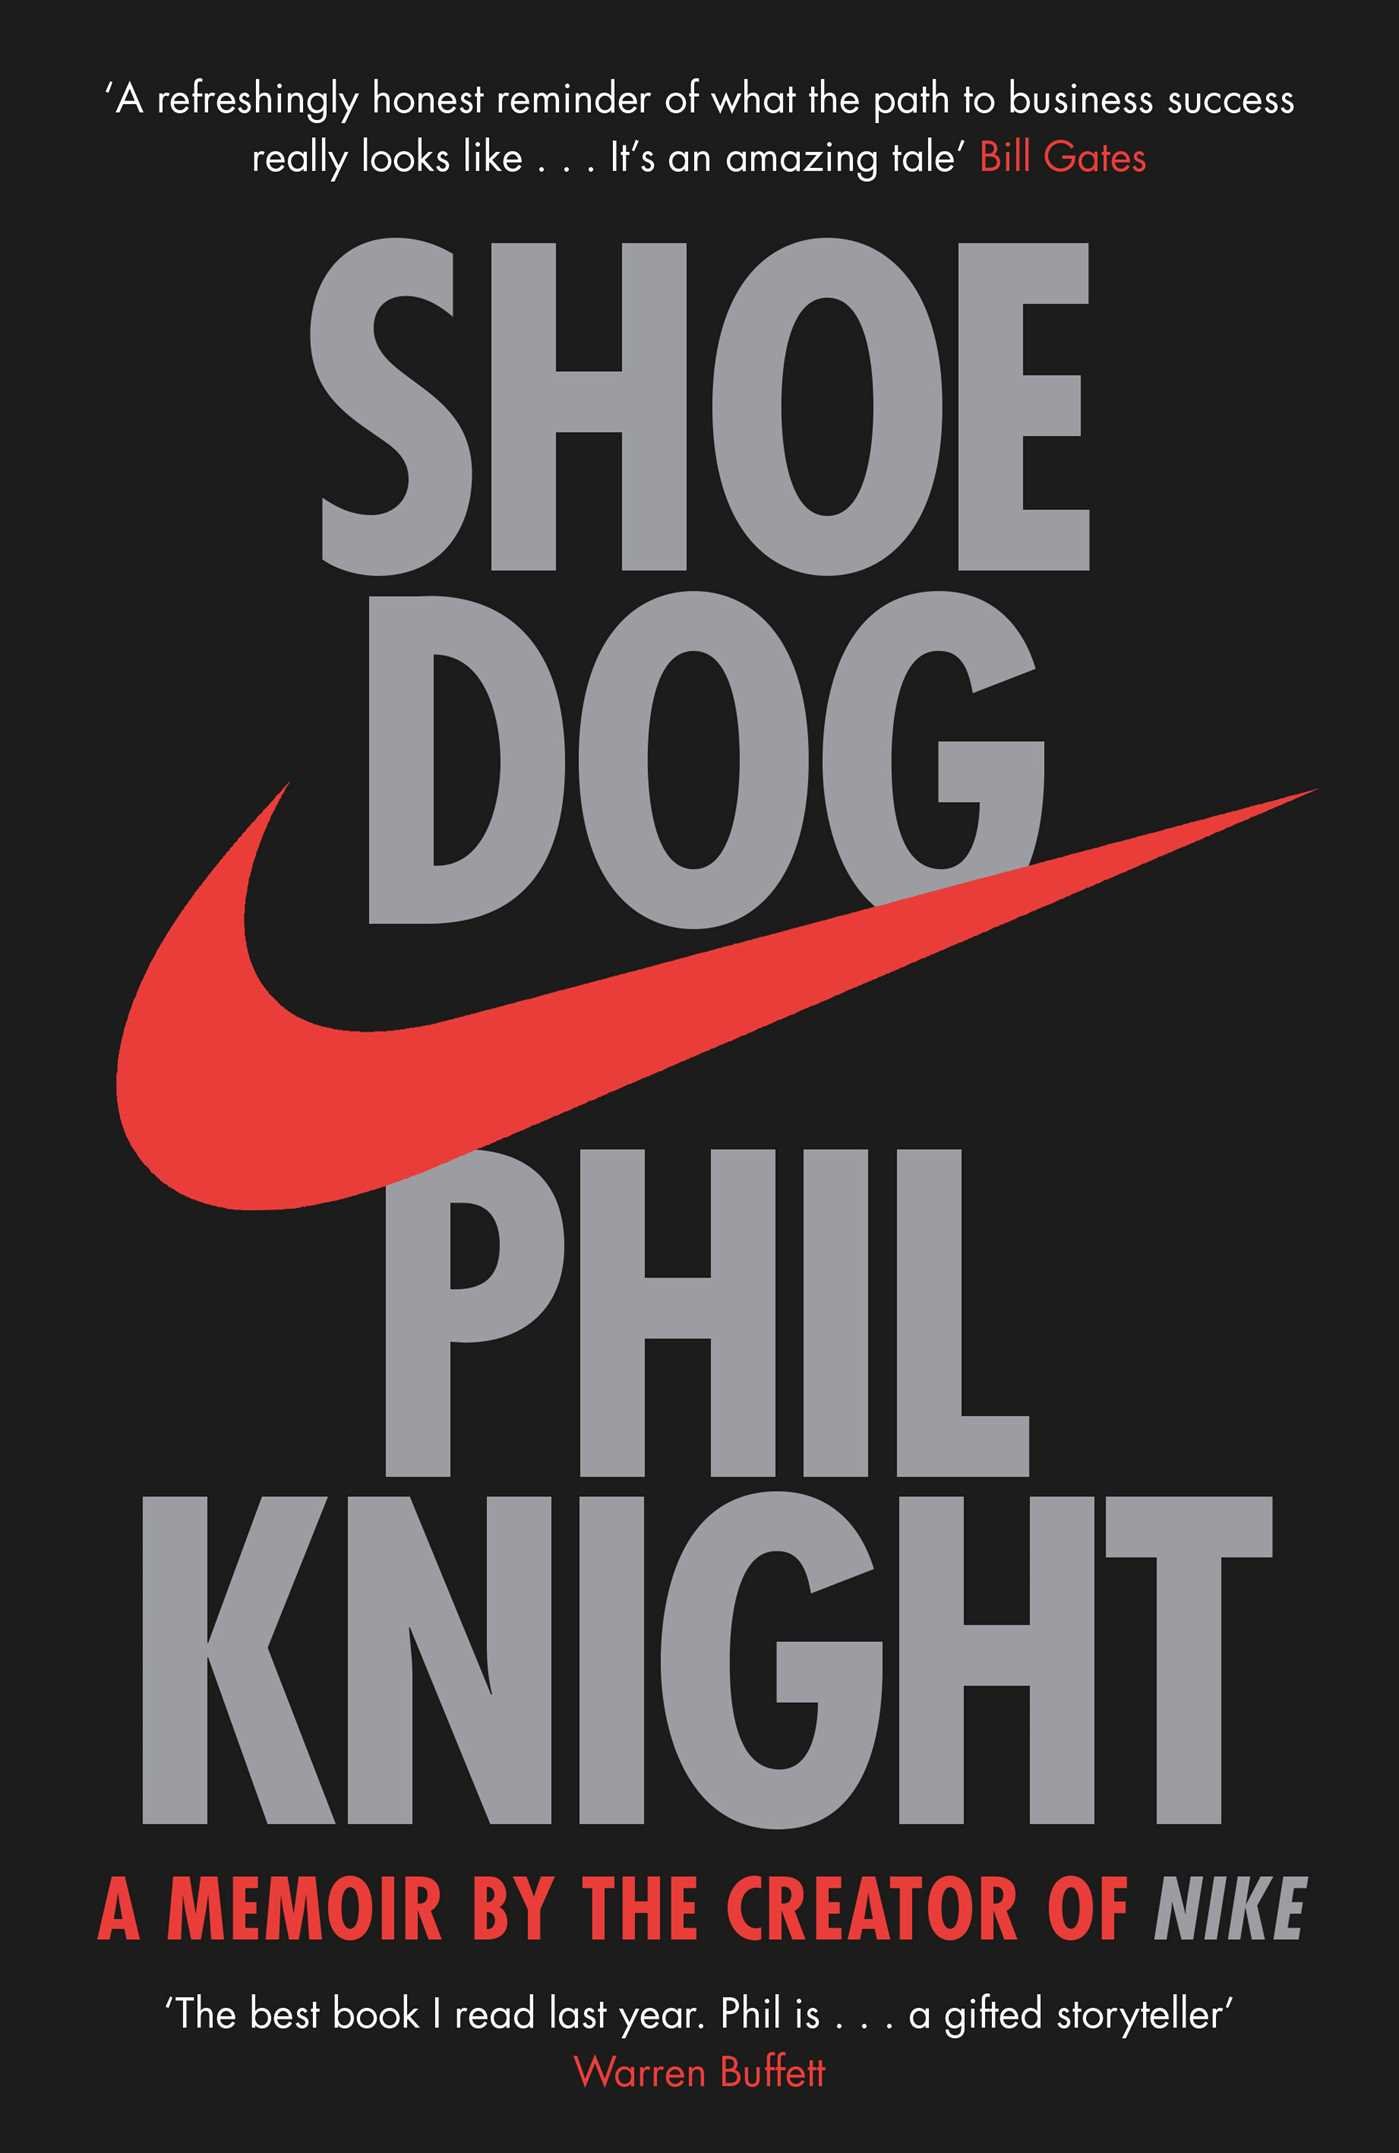 Shoe Dog : A memoir by the creator of Nike by Phil Knight